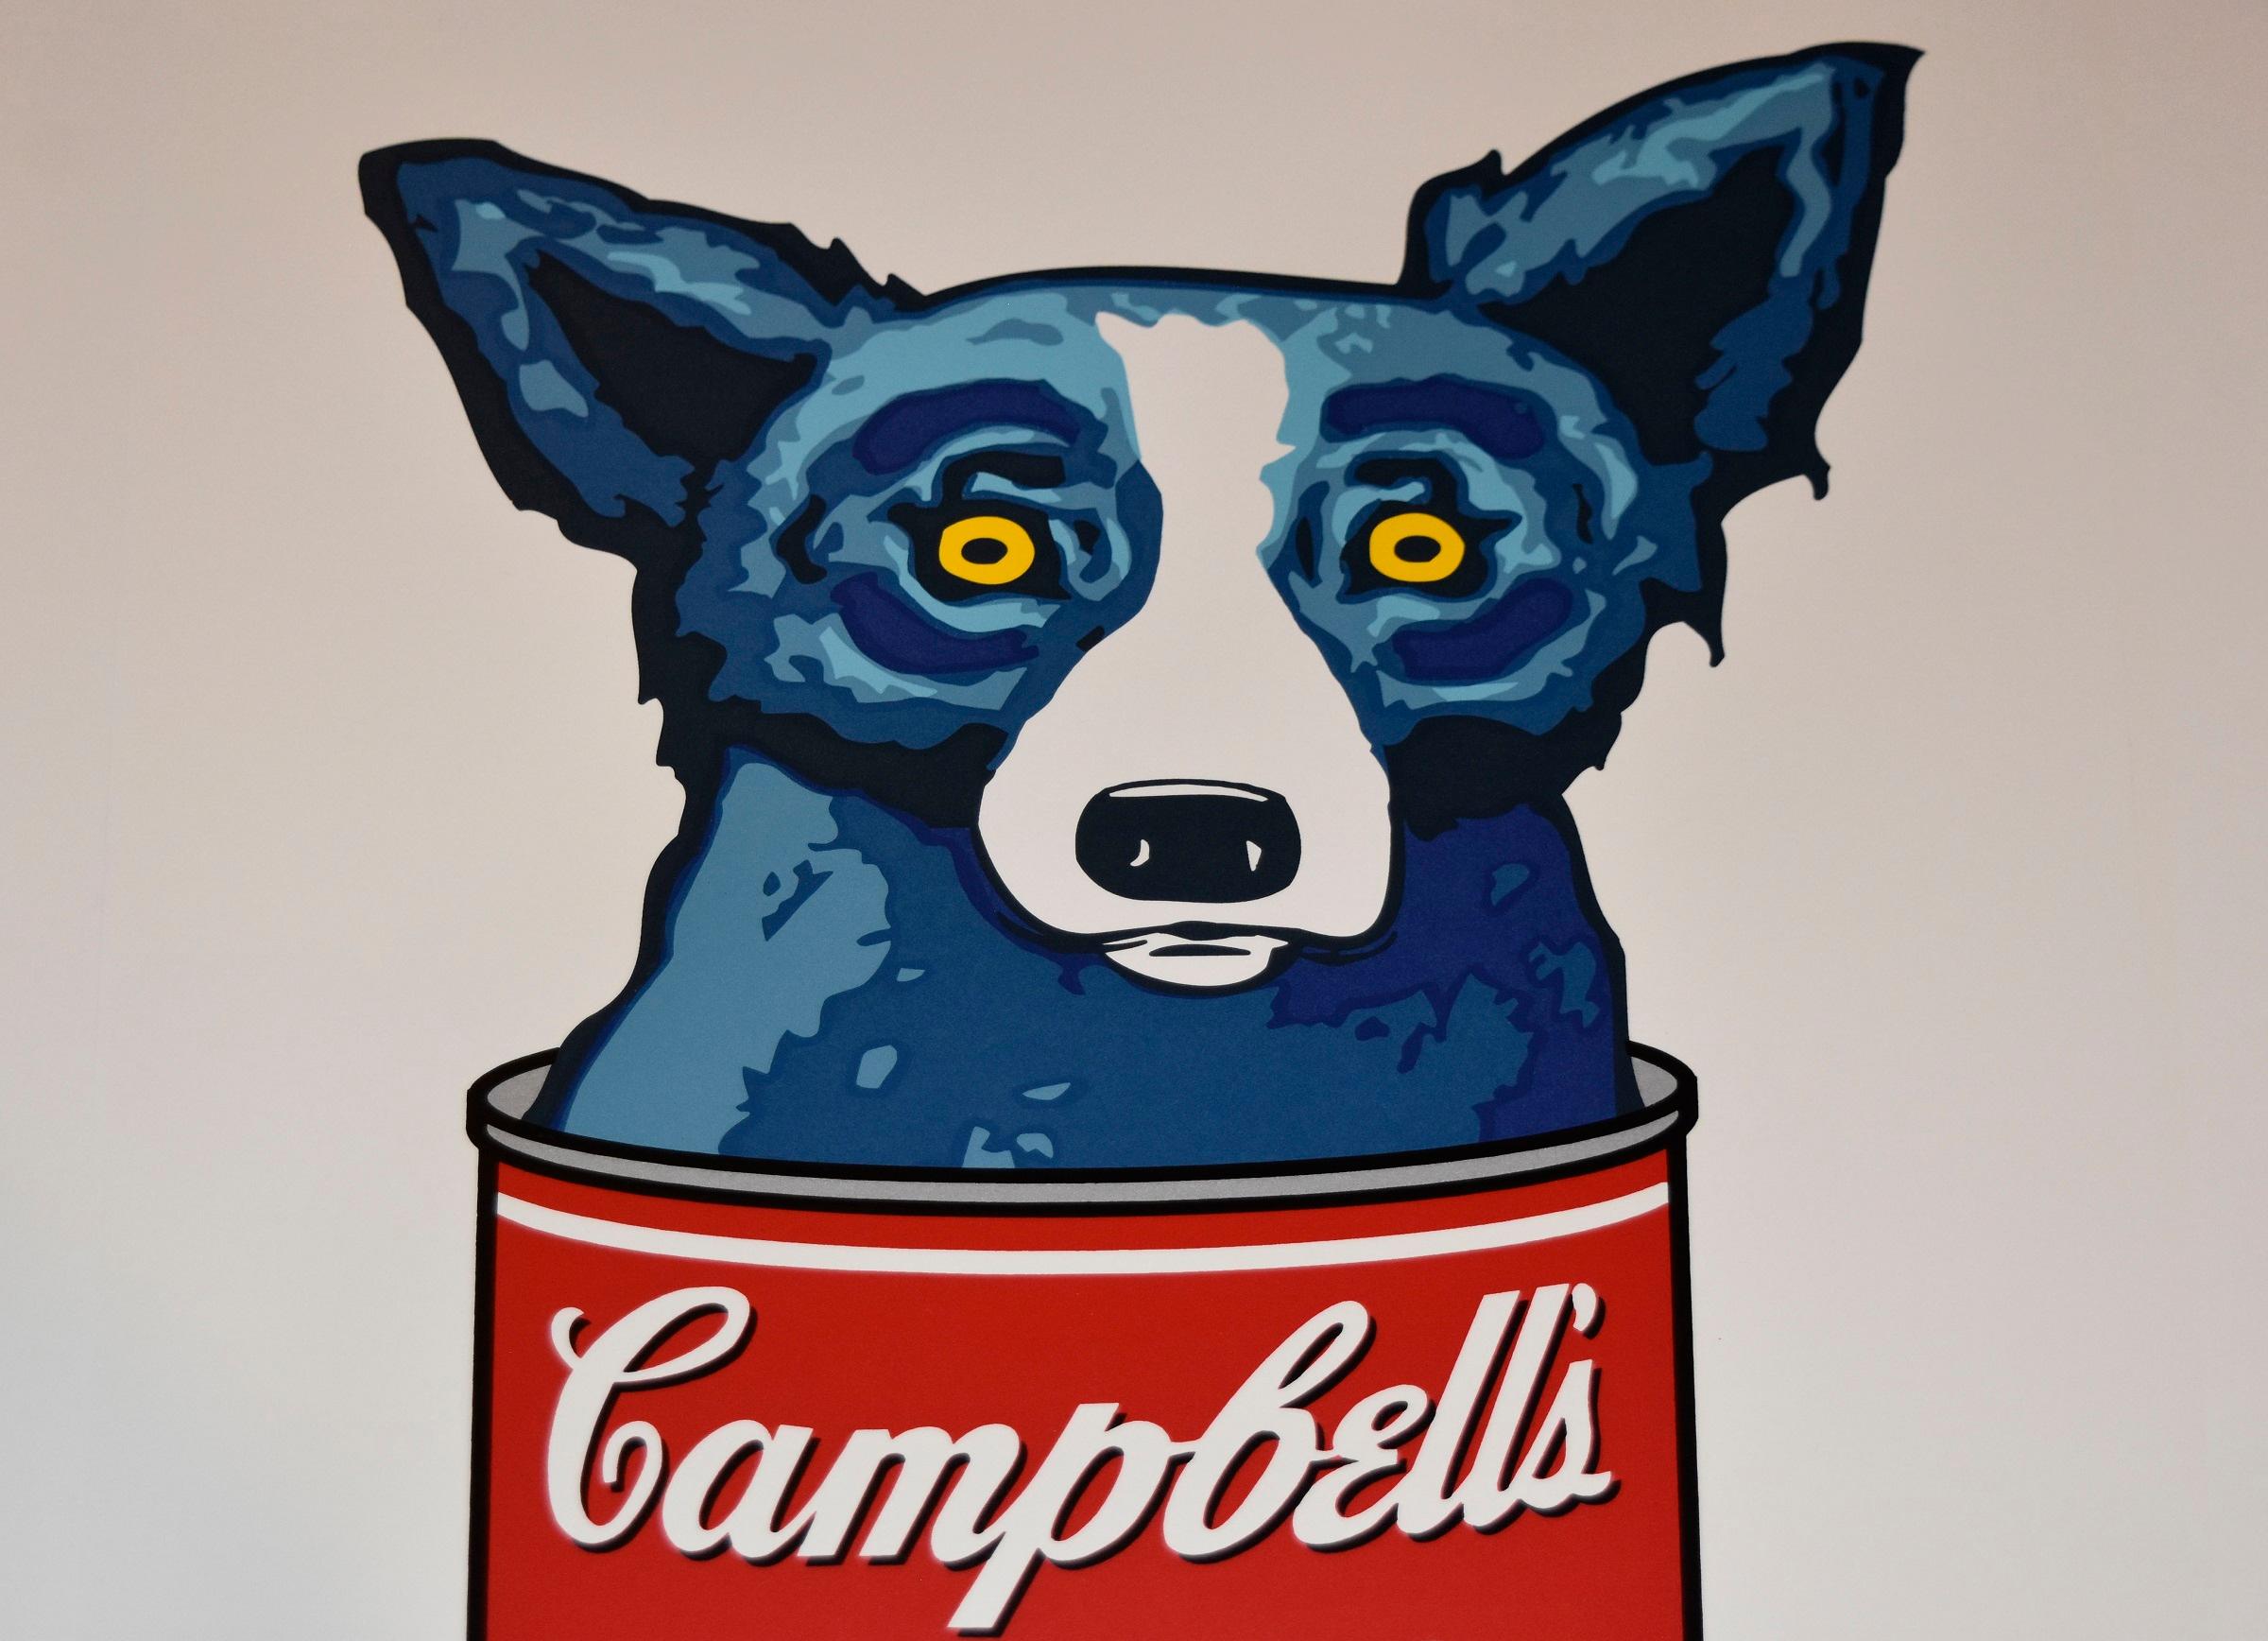 This Blue Dog work consists of a white background with a blue dog in a can of 